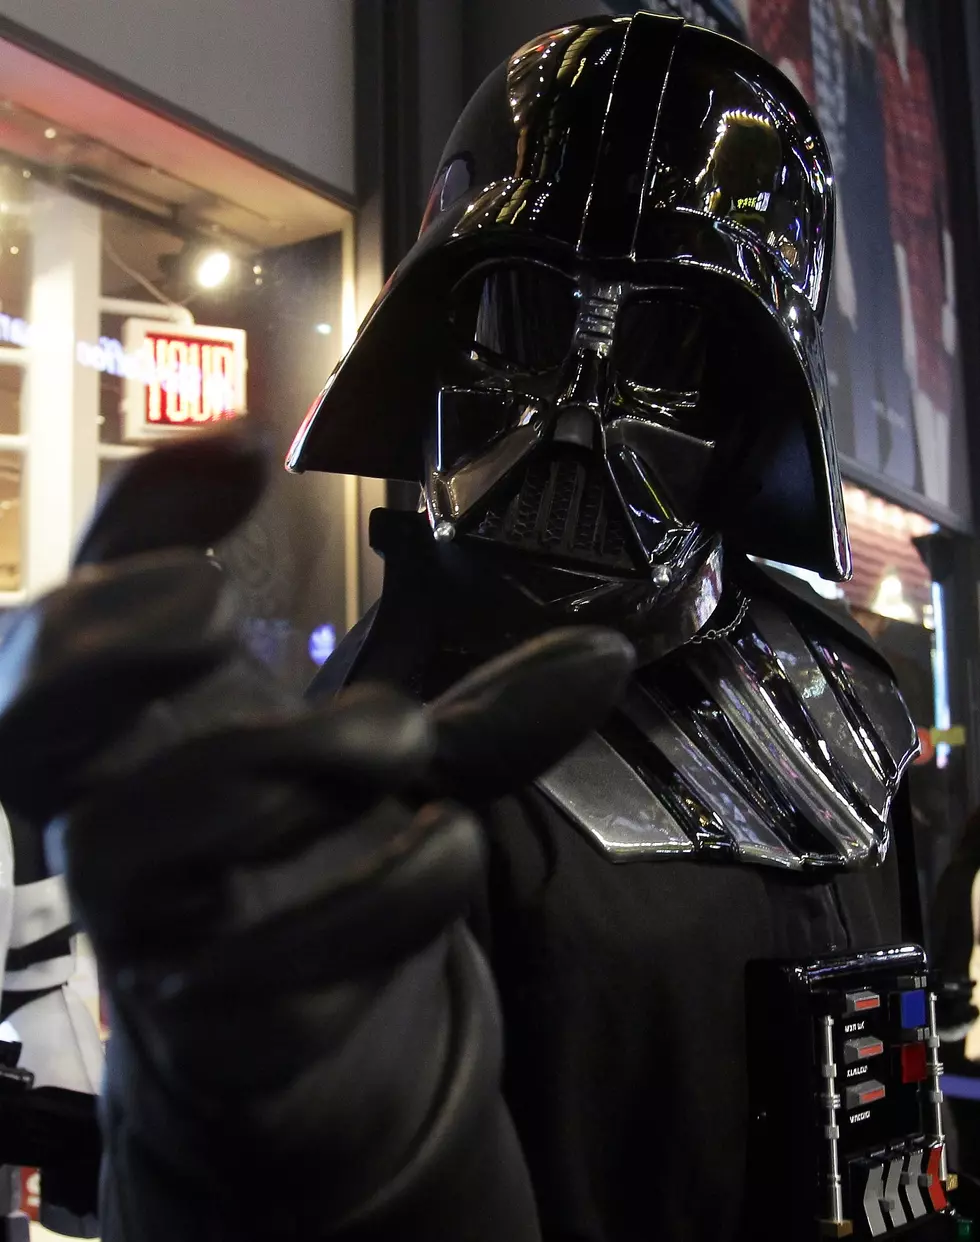 How to See Darth Vader in Rochester